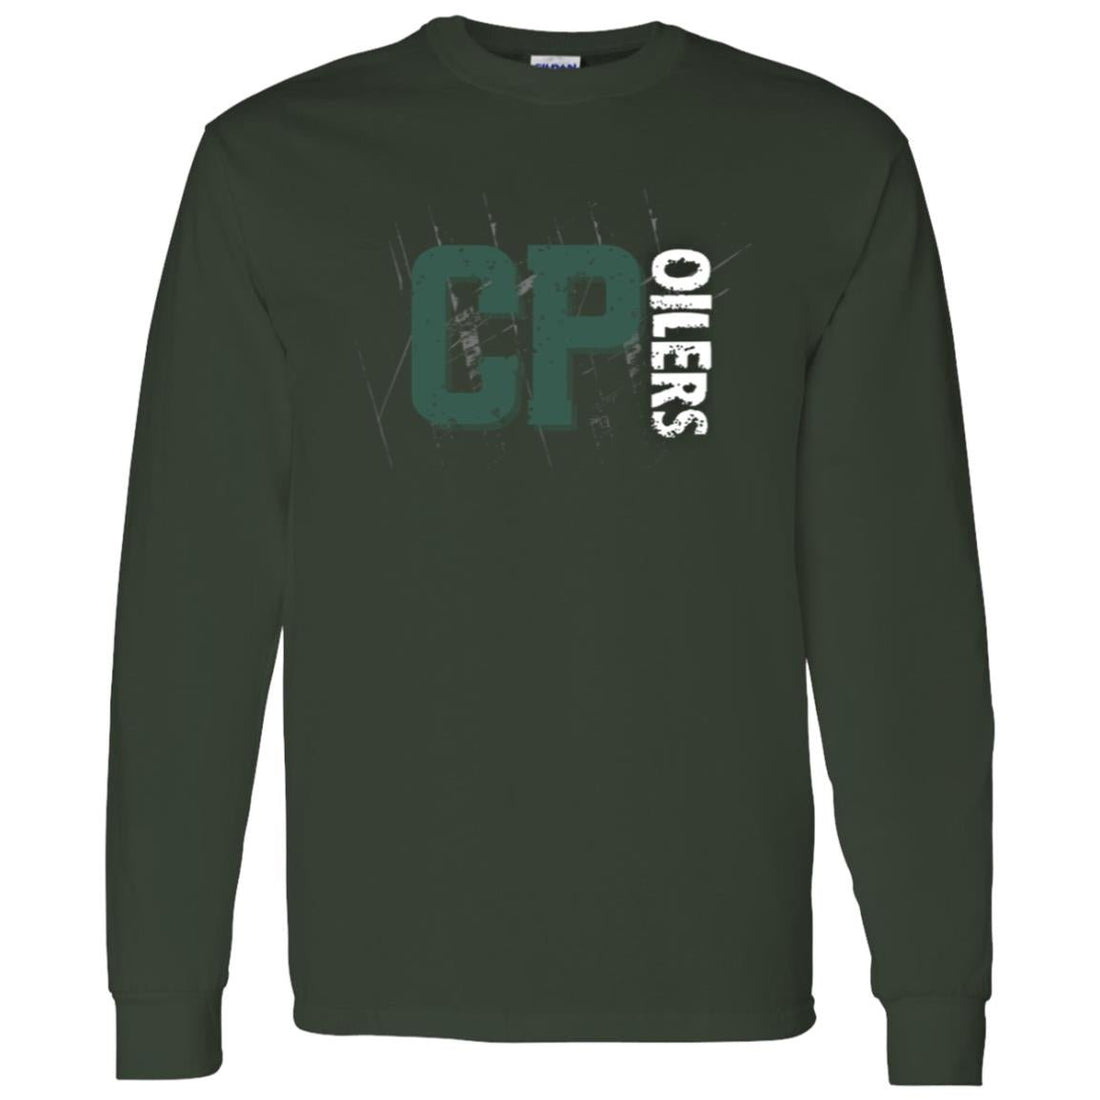 CP Oilers LS T-Shirt 5.3 oz. - T-Shirts - Positively Sassy - CP Oilers LS T-Shirt 5.3 oz.